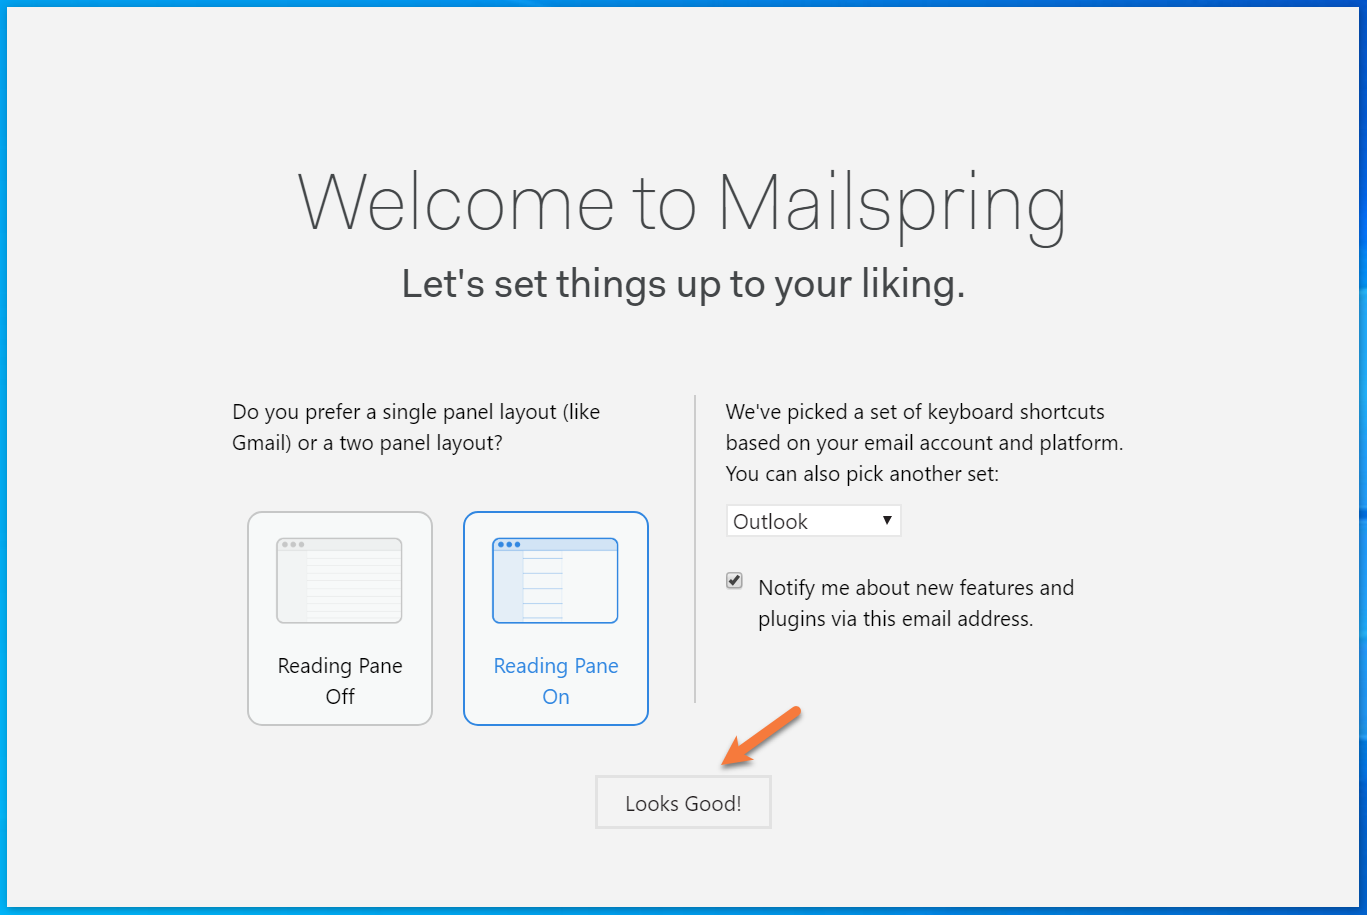 mailspring unable to connect to the port you provided